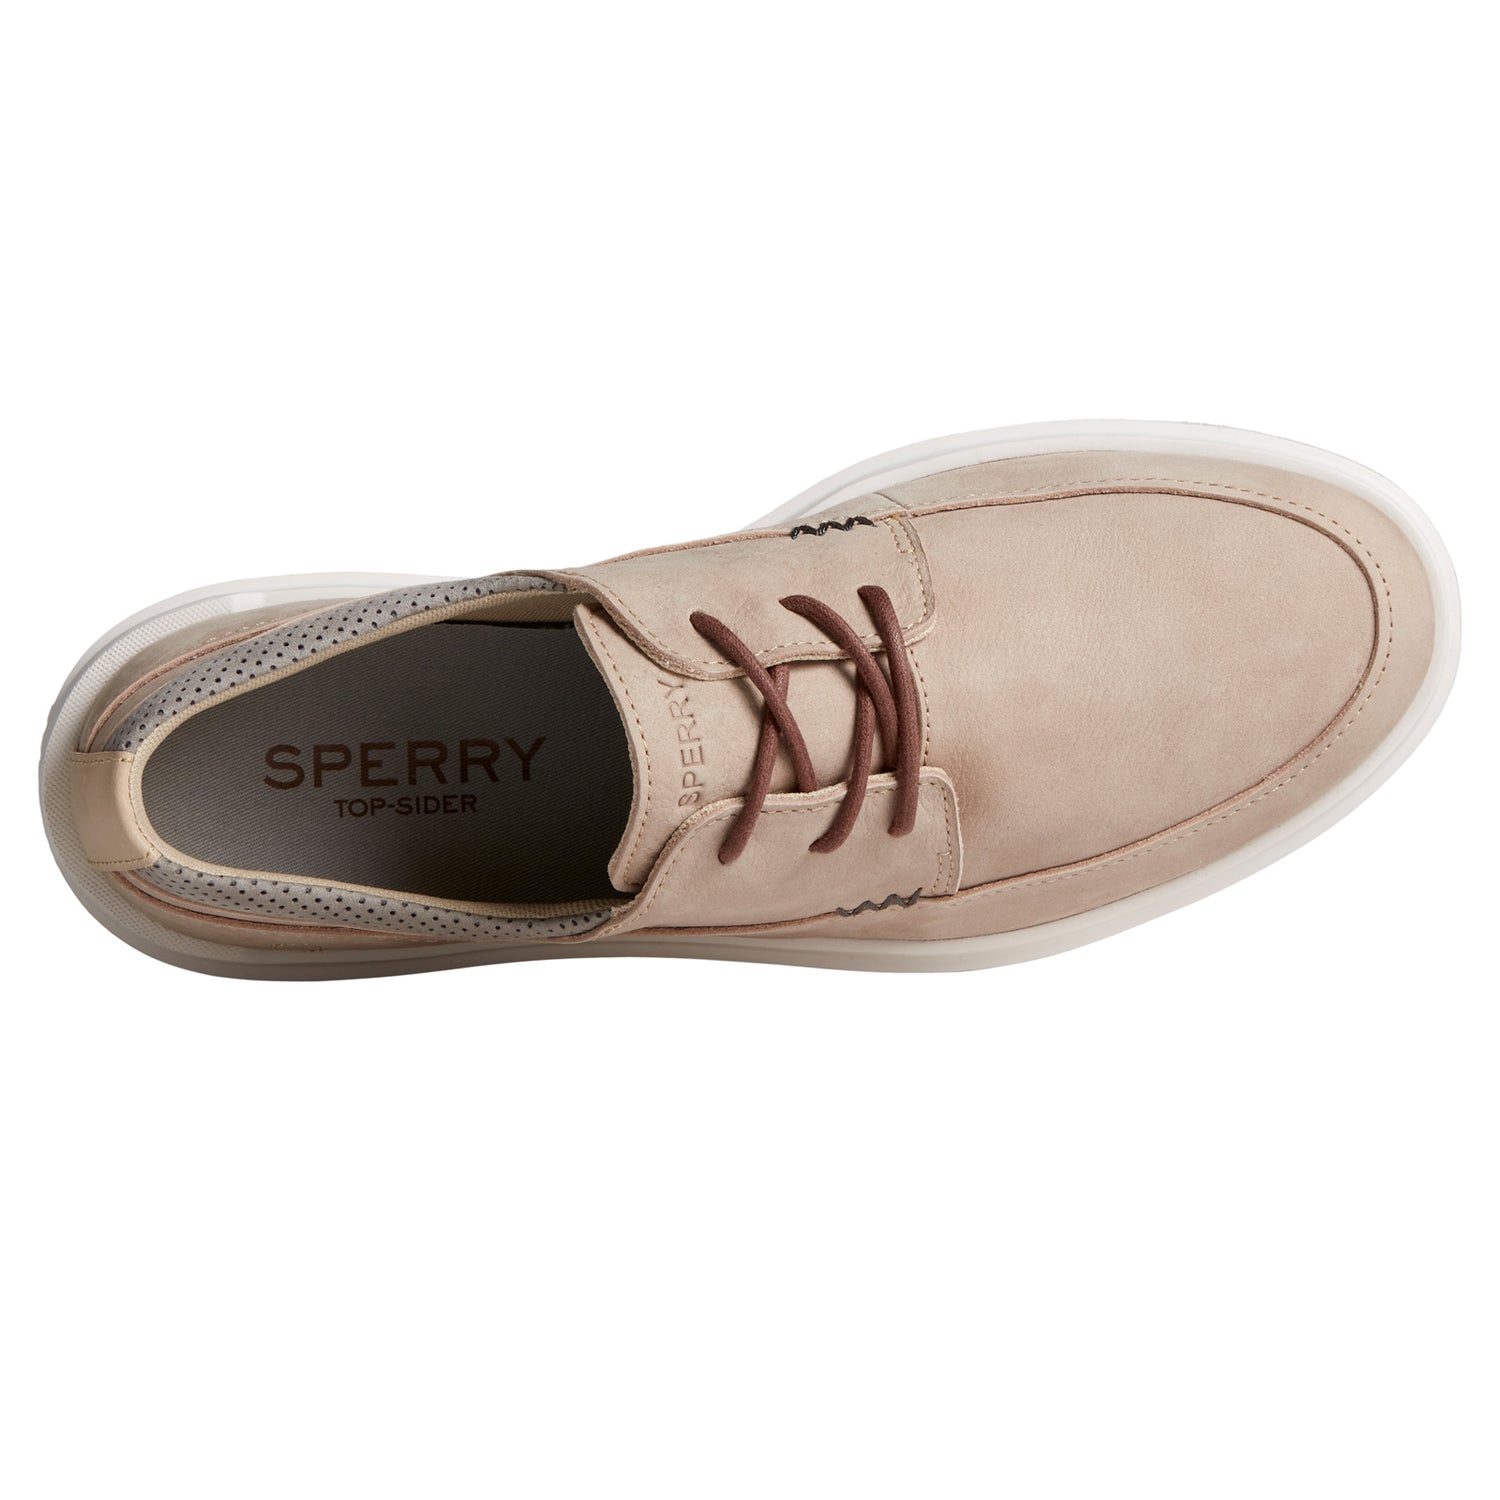 Peltz Shoes  Men's Sperry Cabo II Oxford Tan STS25012